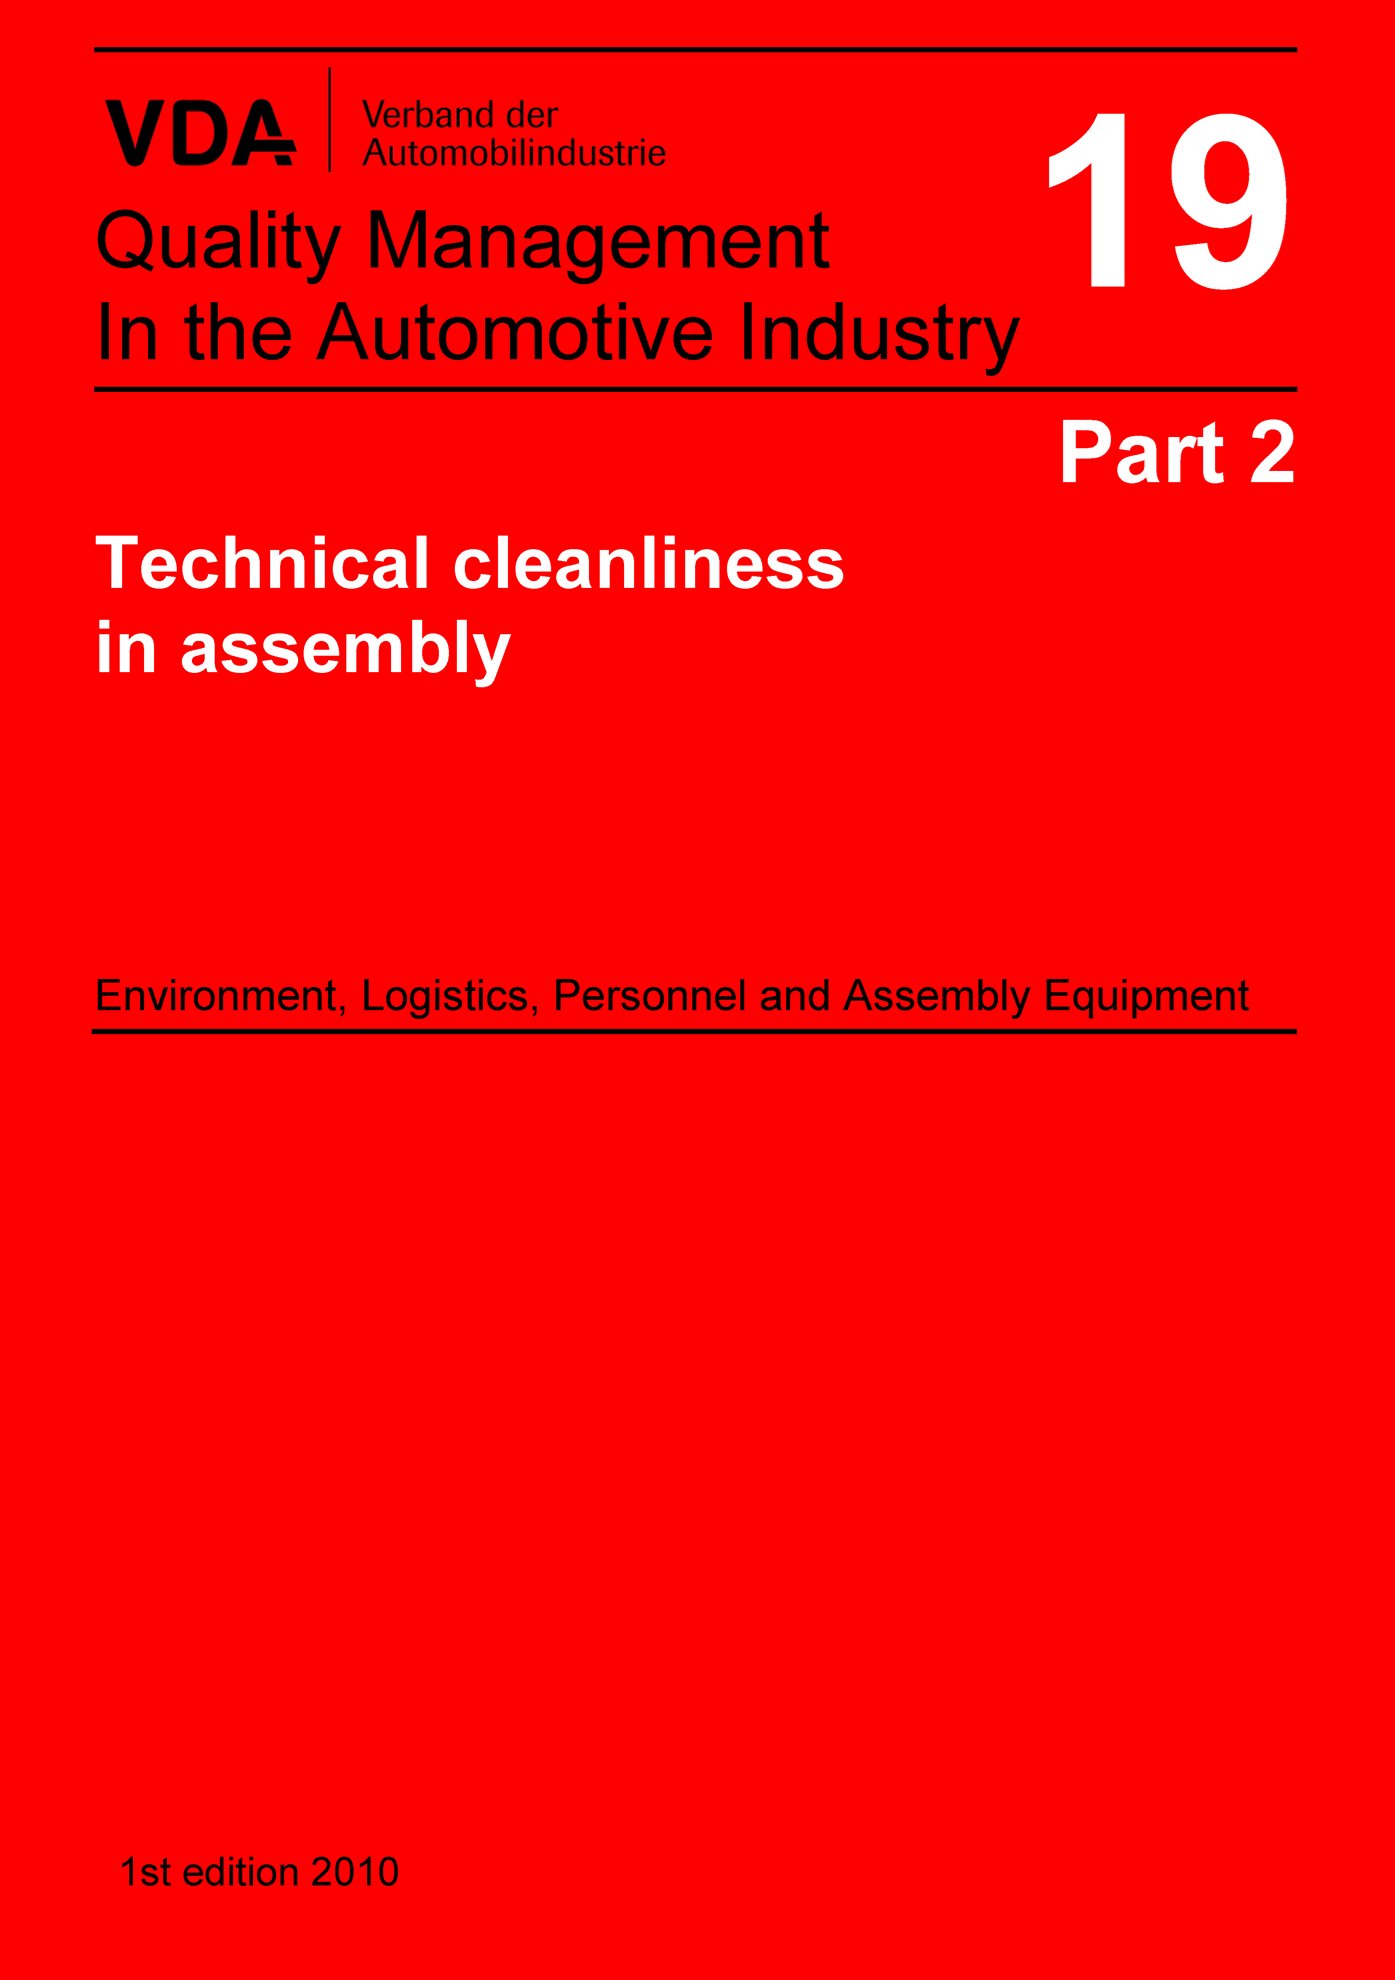 Náhľad  VDA Volume 19 Part 2, Technical cleanliness in assembly - Environment, Logistics, Personnel and Assembly Equipment - 1st edition 2010 1.1.2010